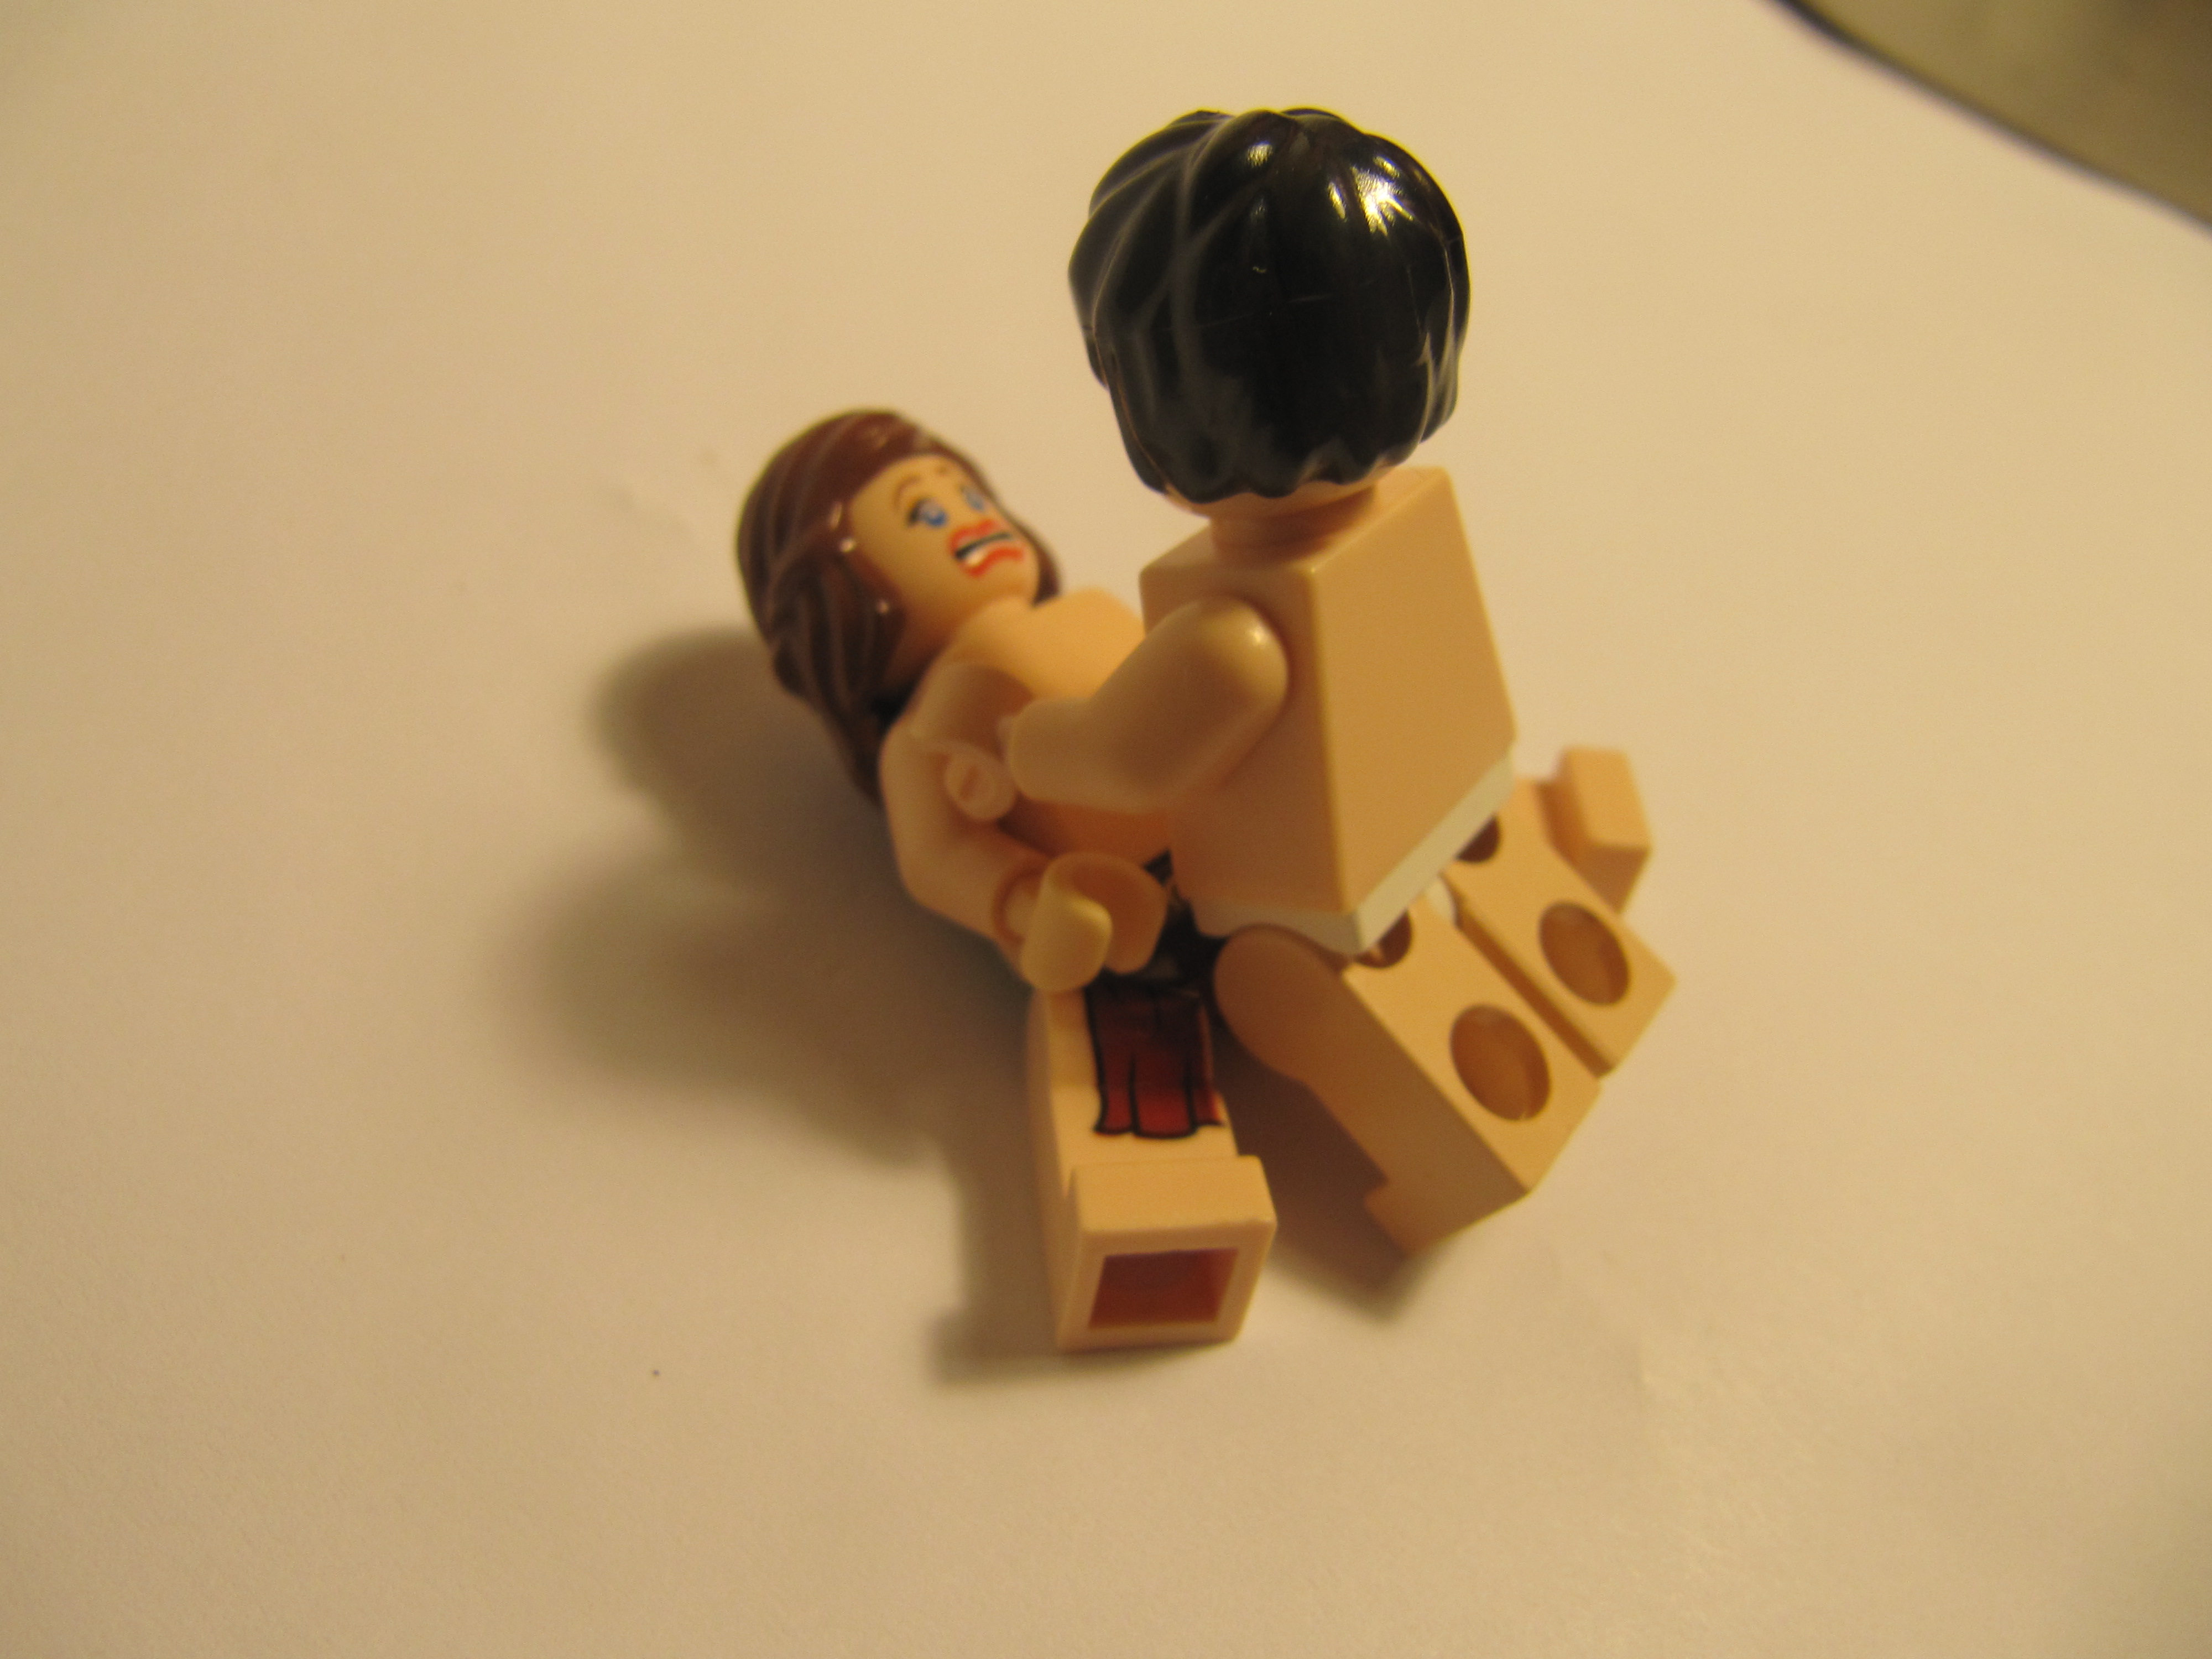 Your ego is my lego. 